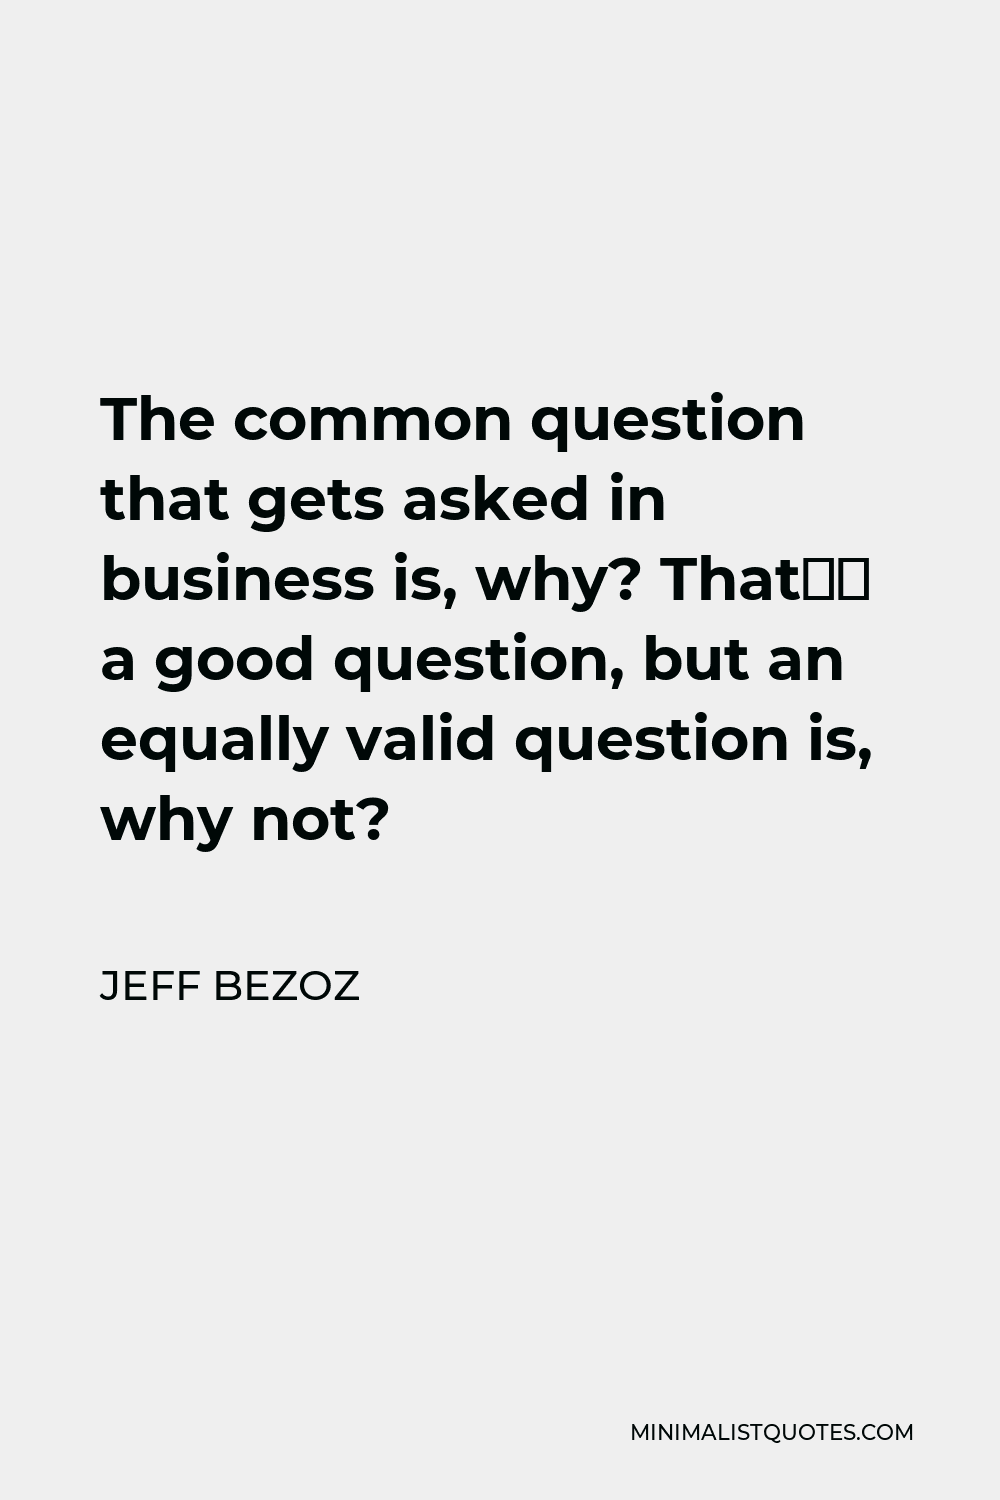 Jeff Bezoz Quote - The common question that gets asked in business is, why? That’s a good question, but an equally valid question is, why not?